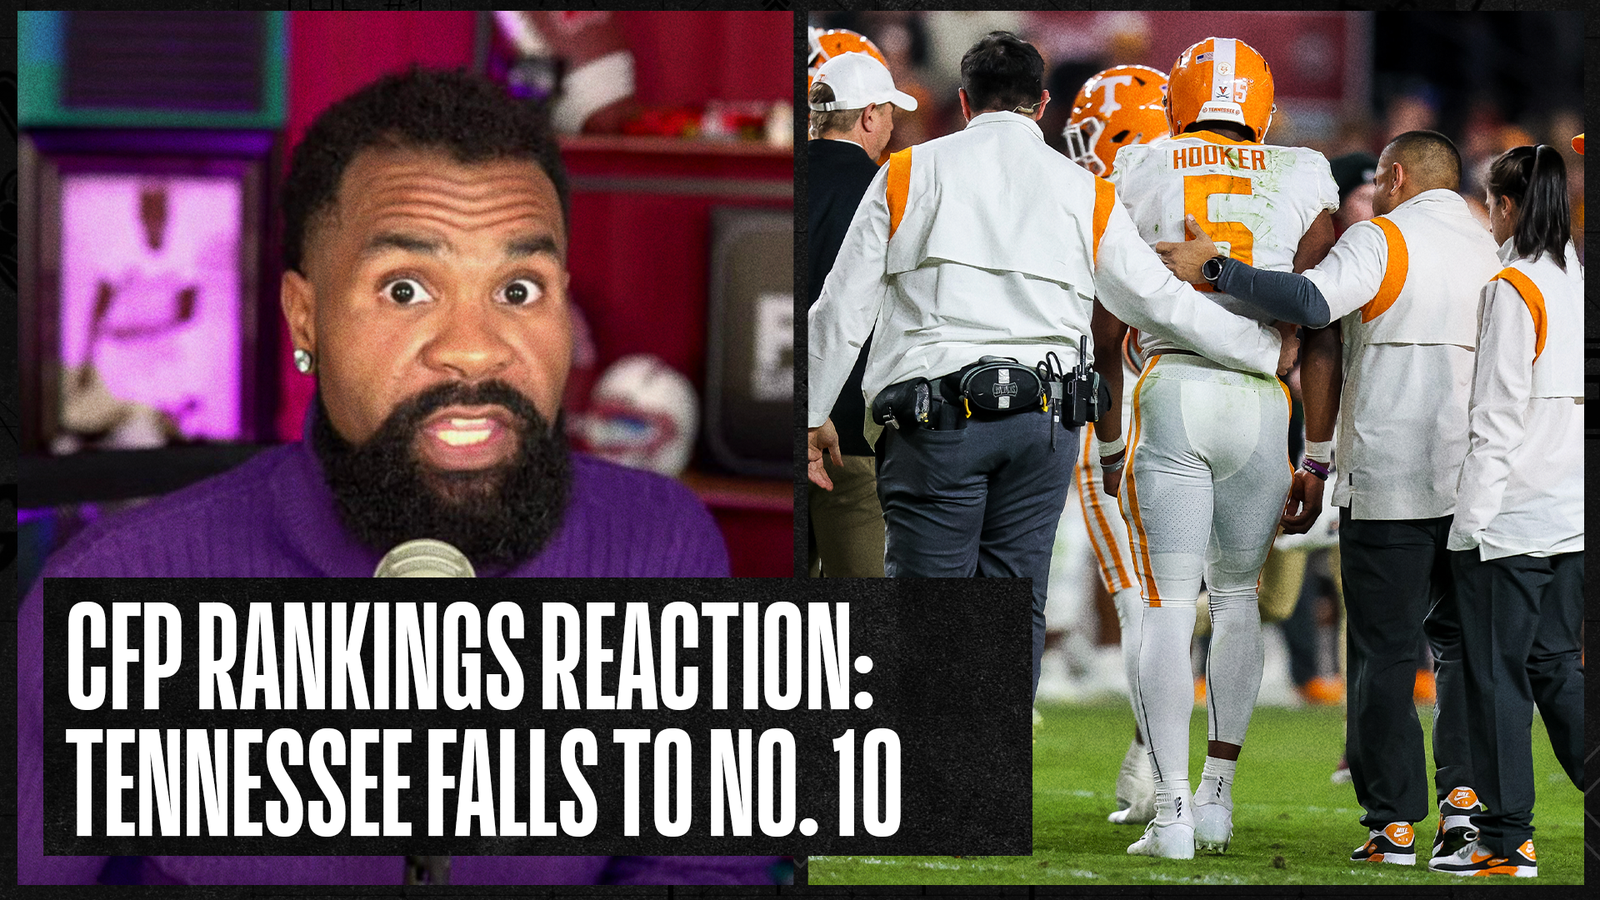 CFP ranking reaction: Tennessee drops to No. 10;